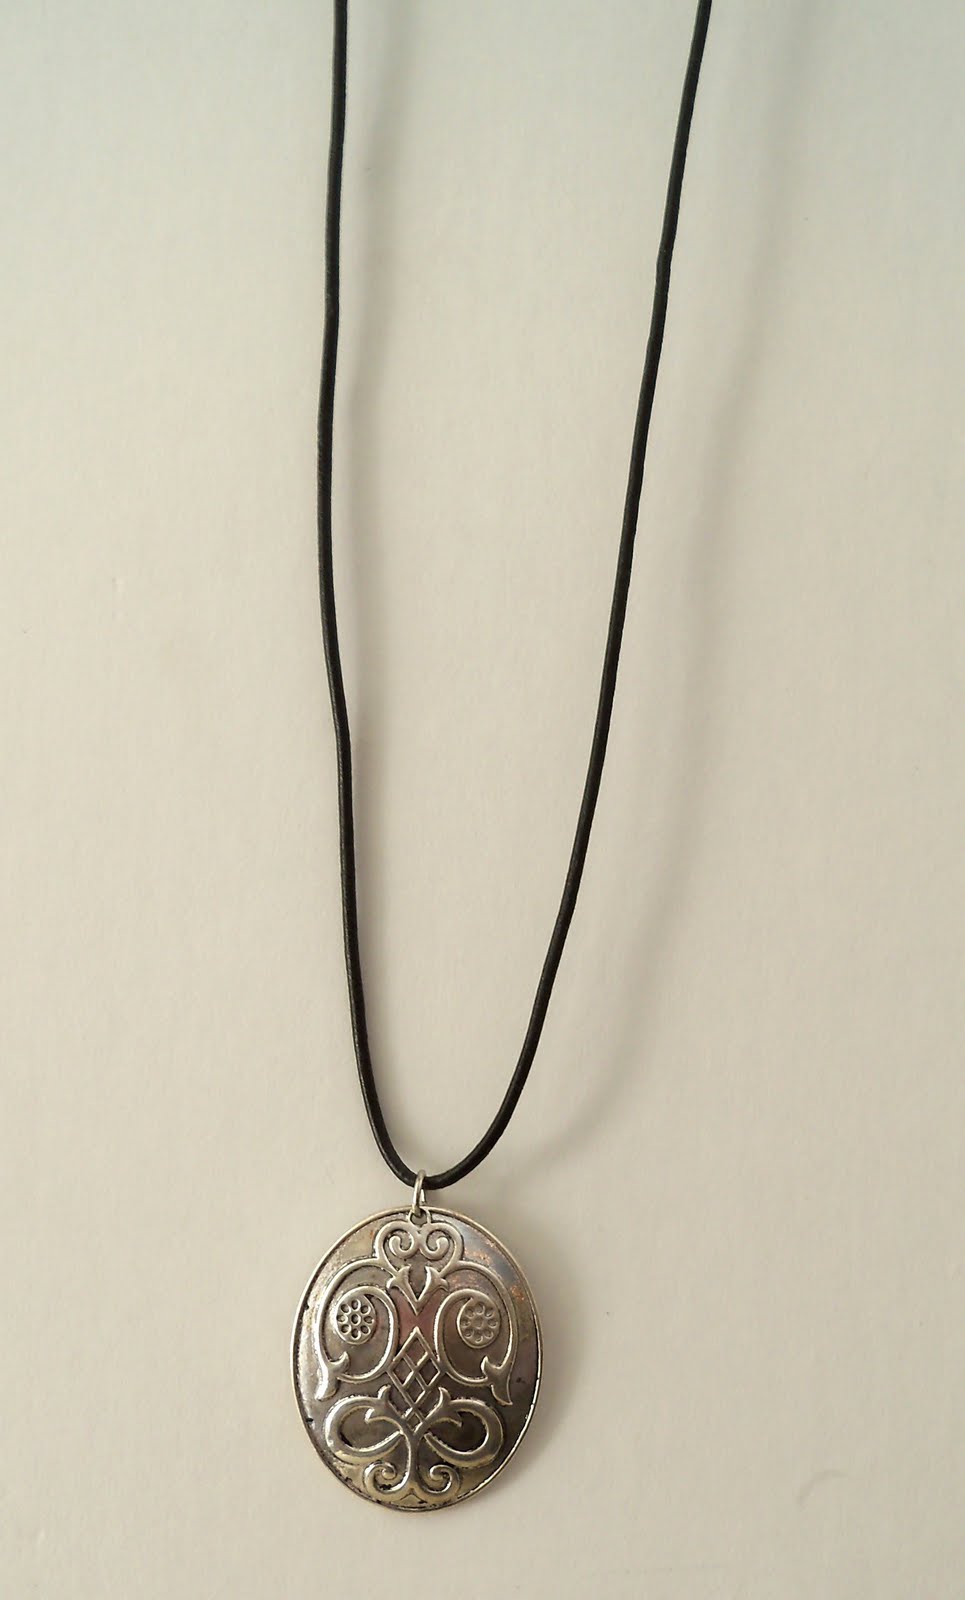 The Trend For Pendants On Cord